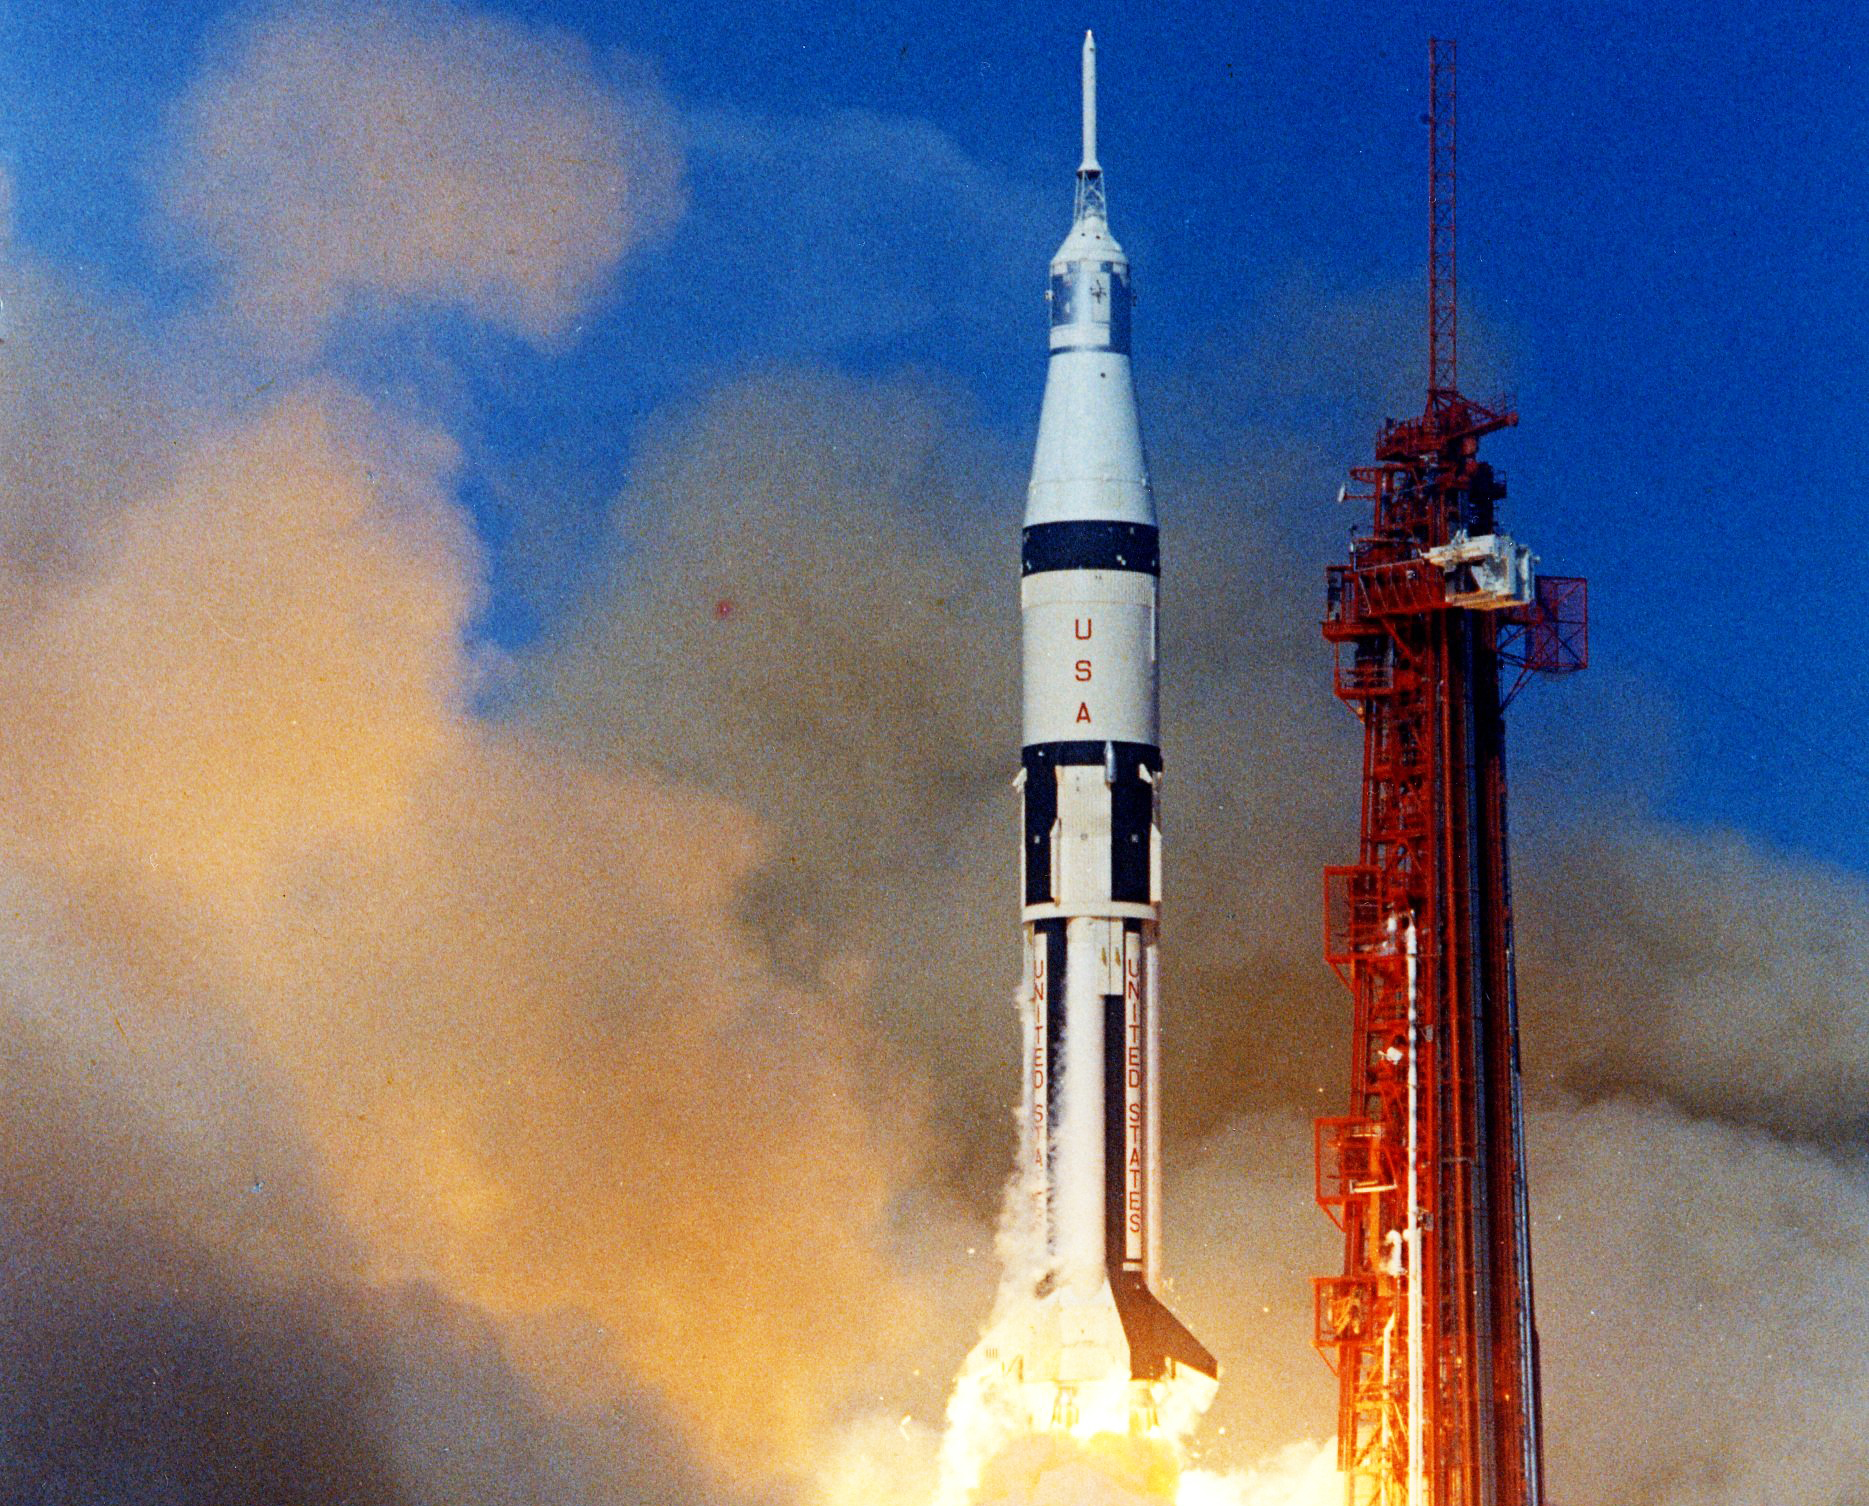 Apollo 7 lifts off from Cape Kennedy